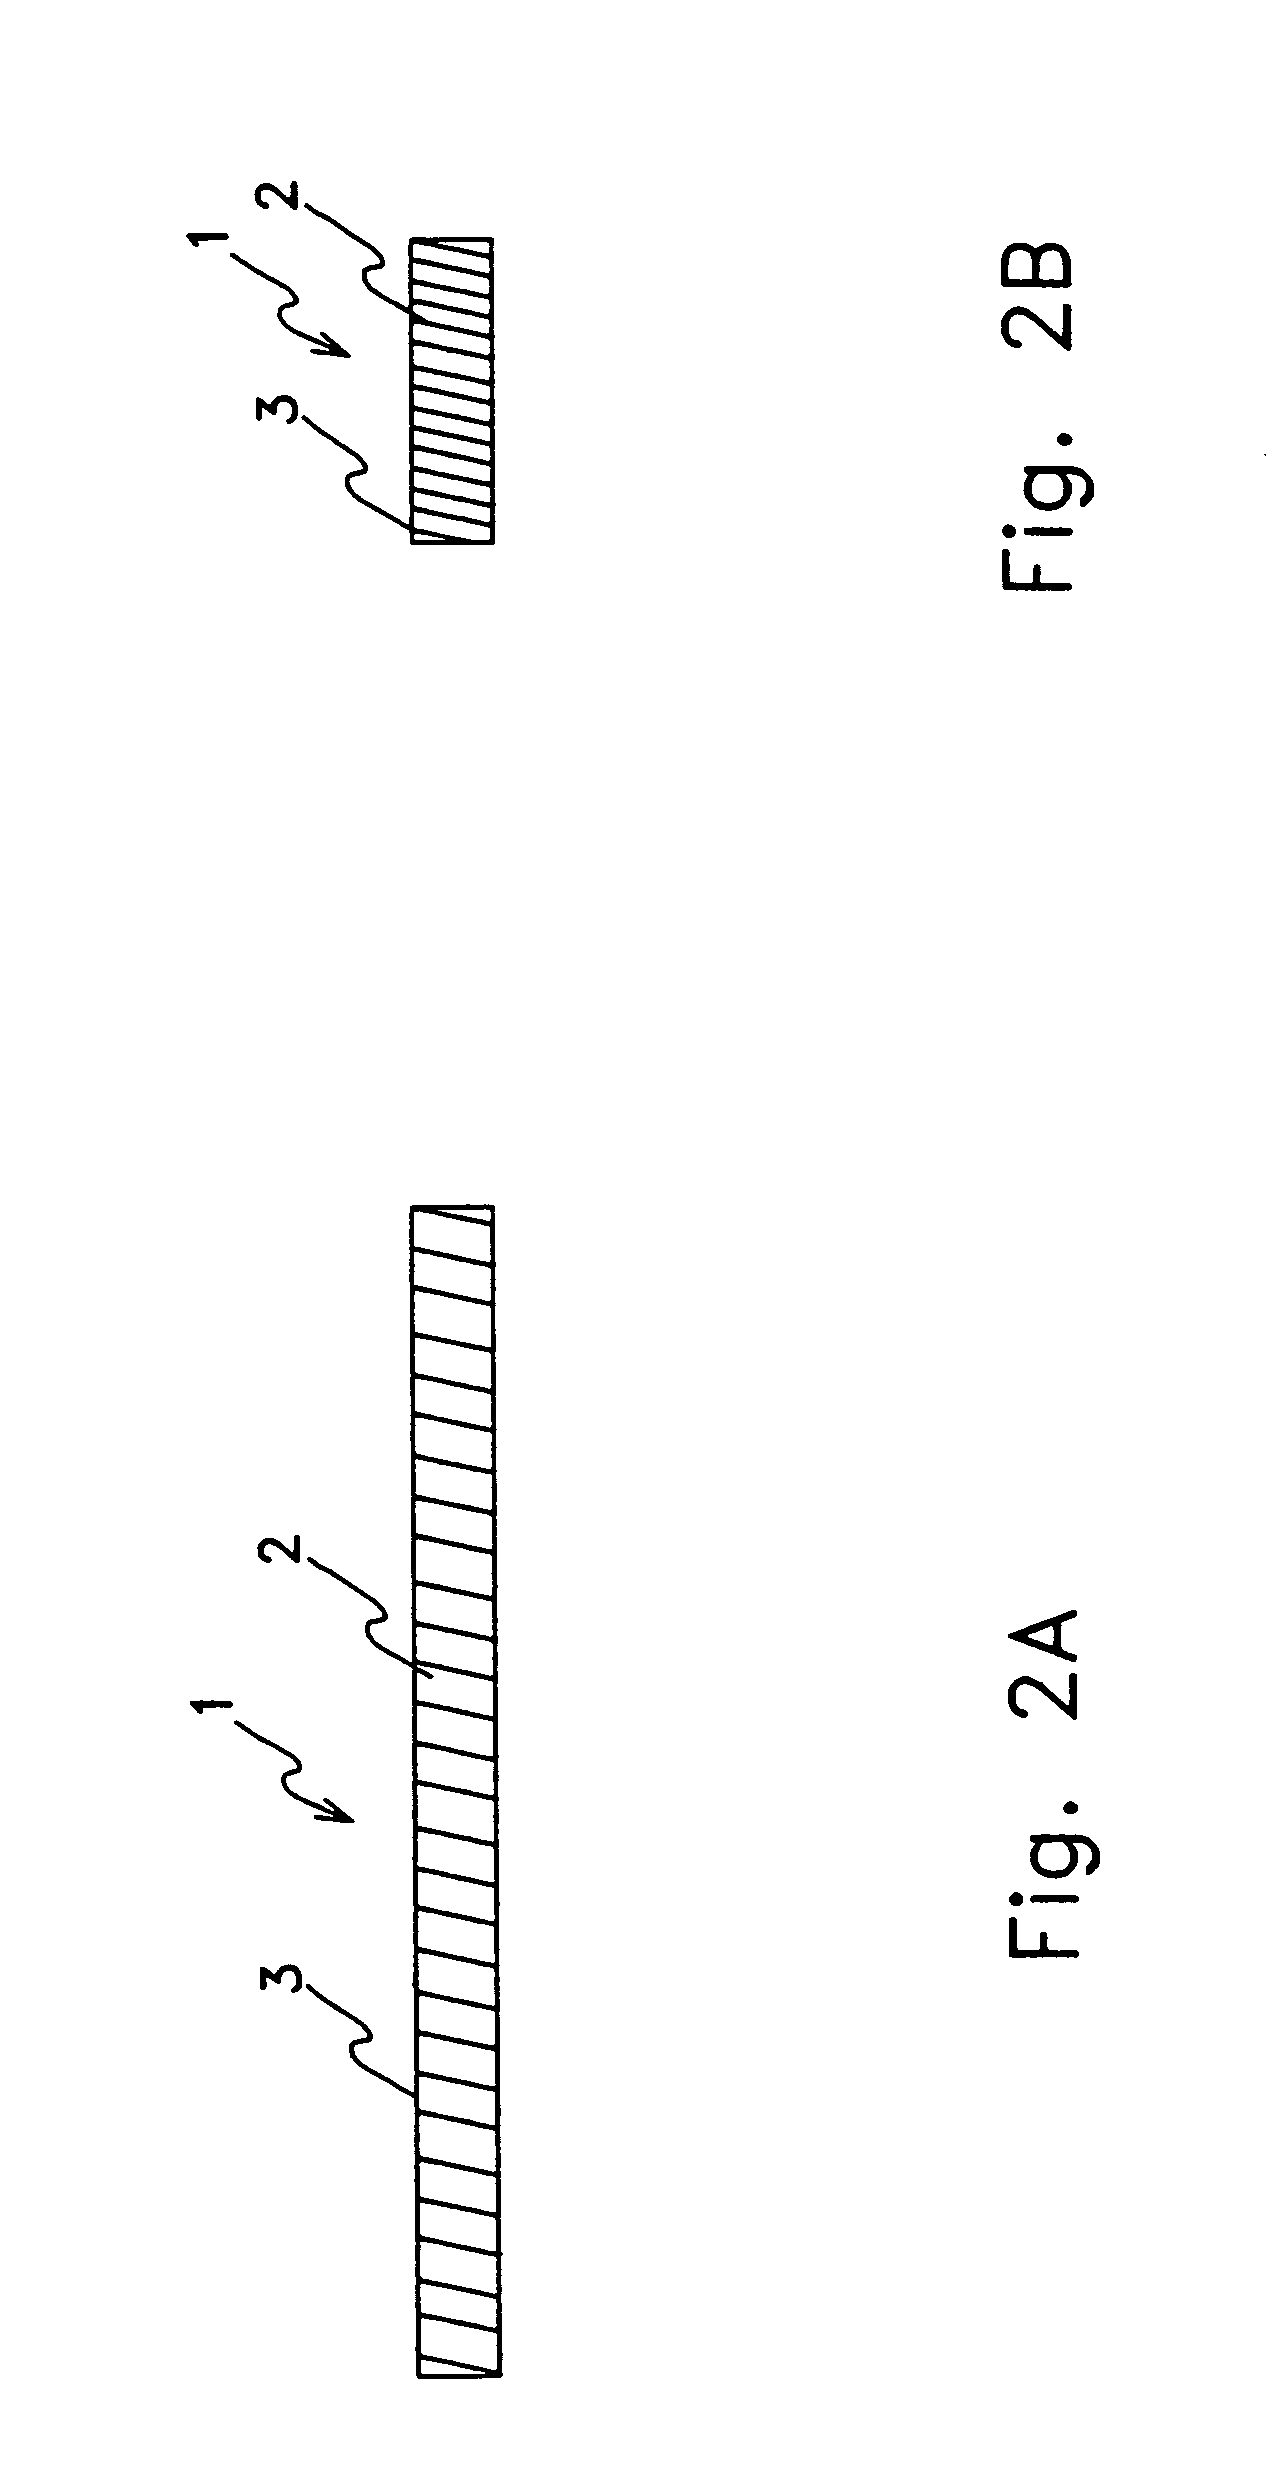 Pressure differential distribution system